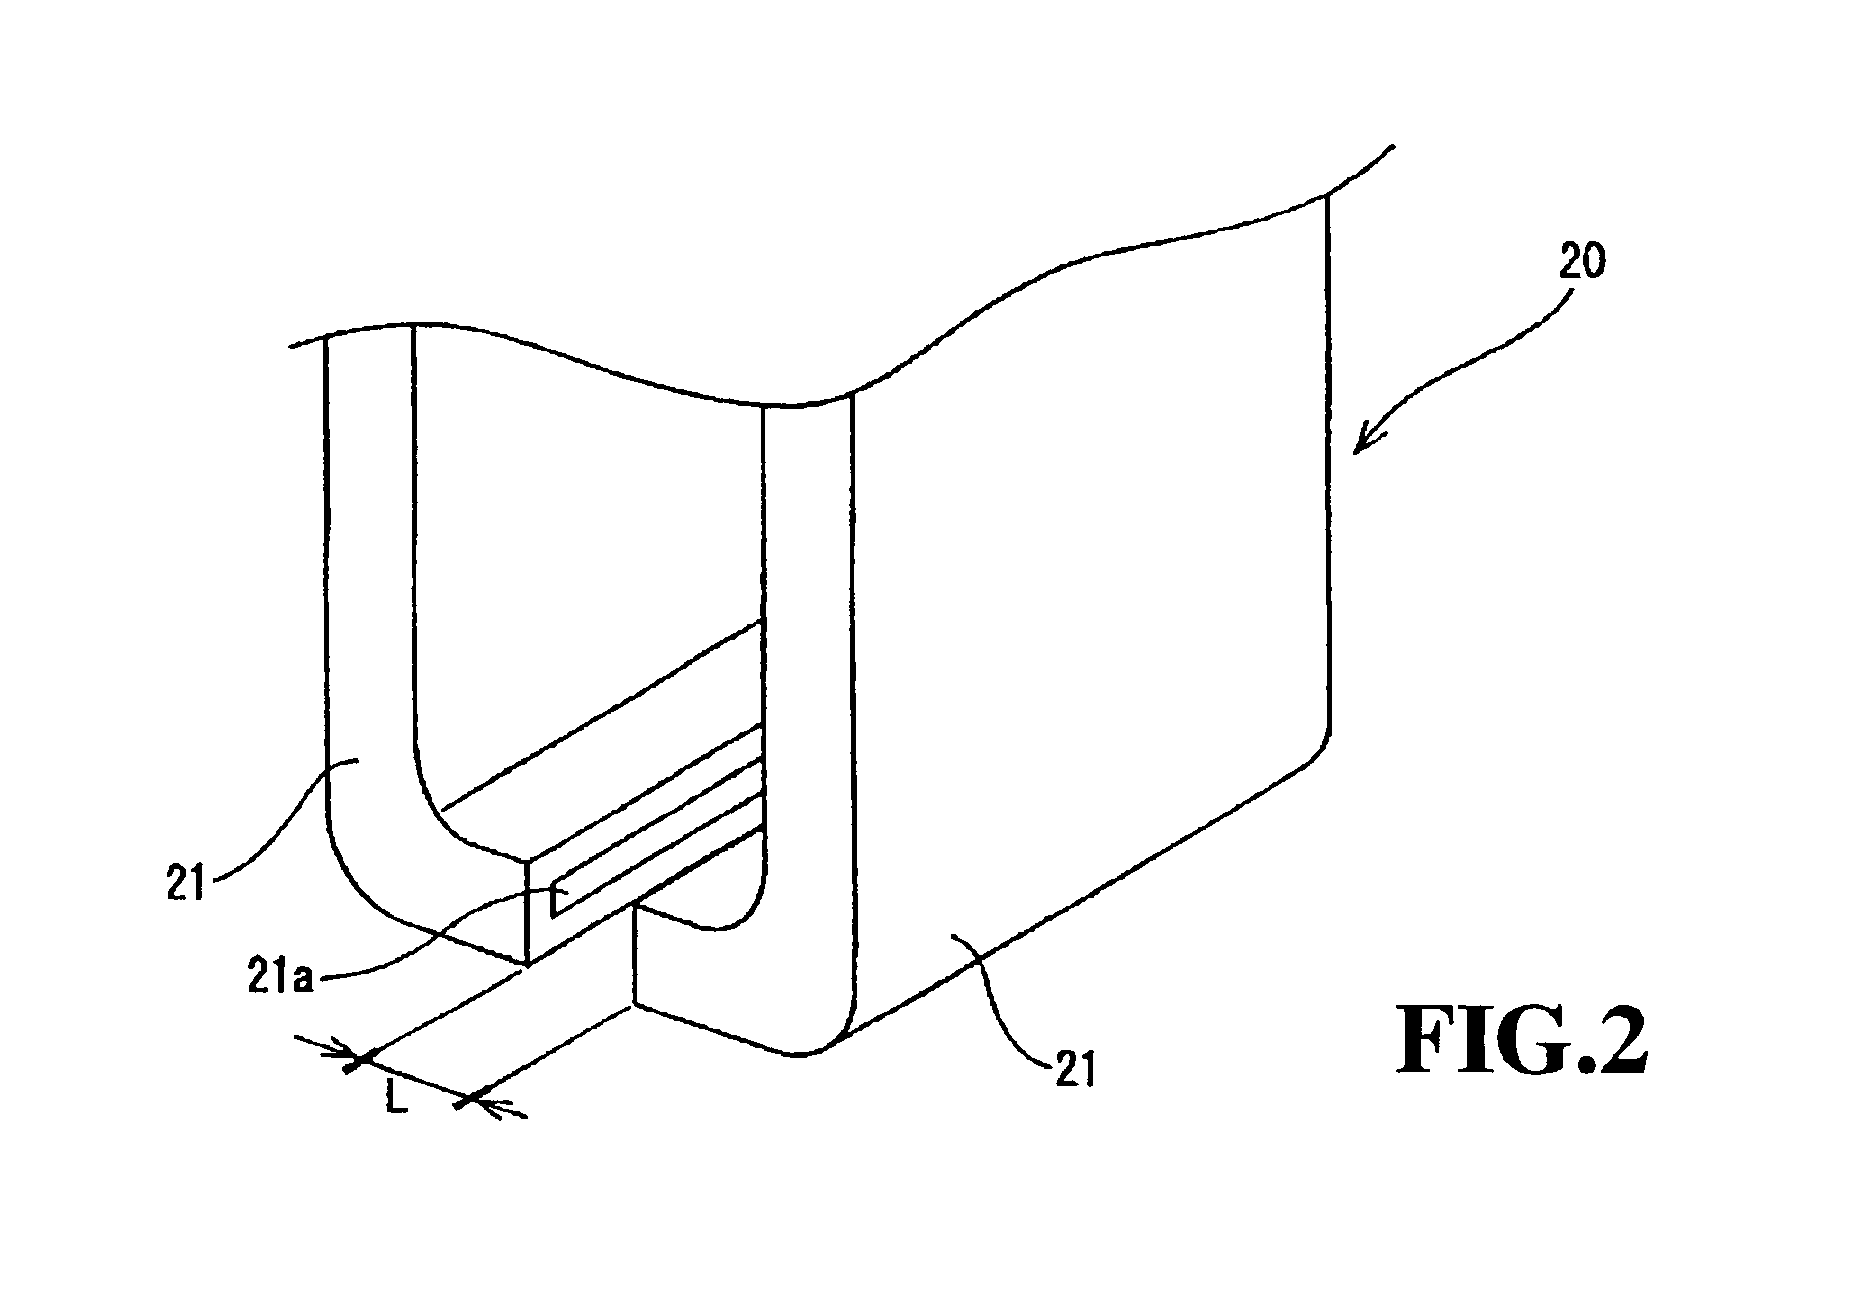 Method and apparatus for waterproofing a wire harness